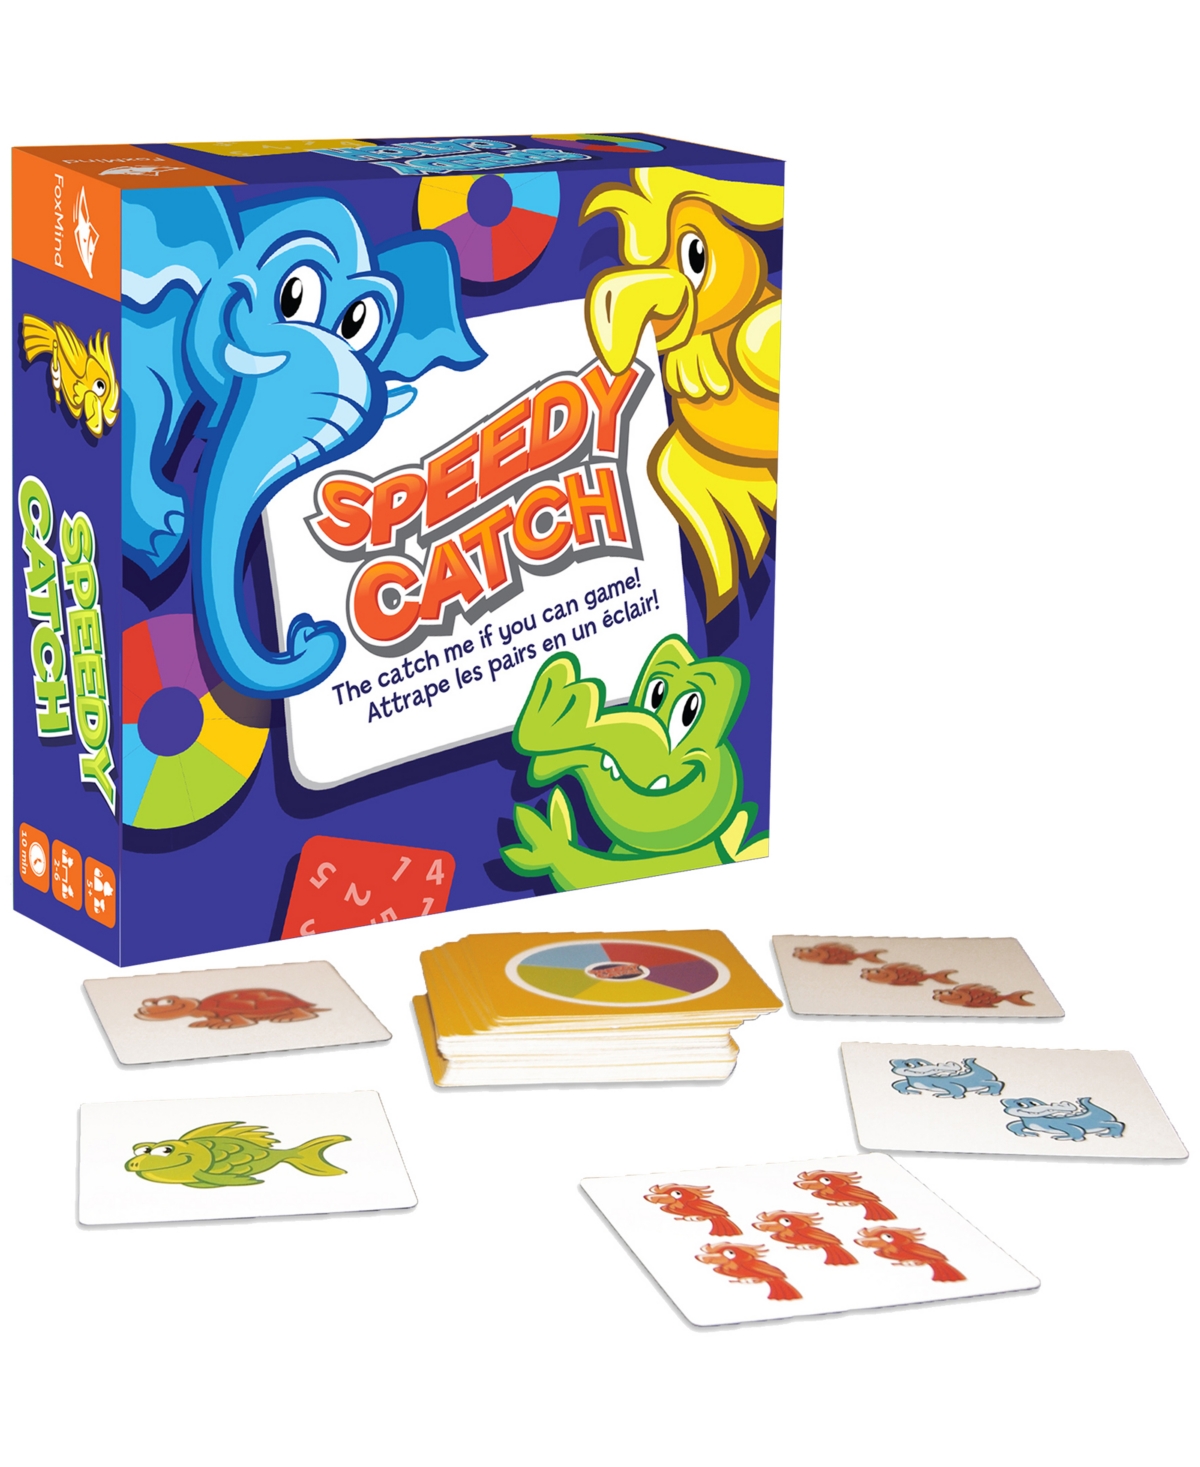 Shop University Games Foxmind Games Speedy Catch Card Game In No Color